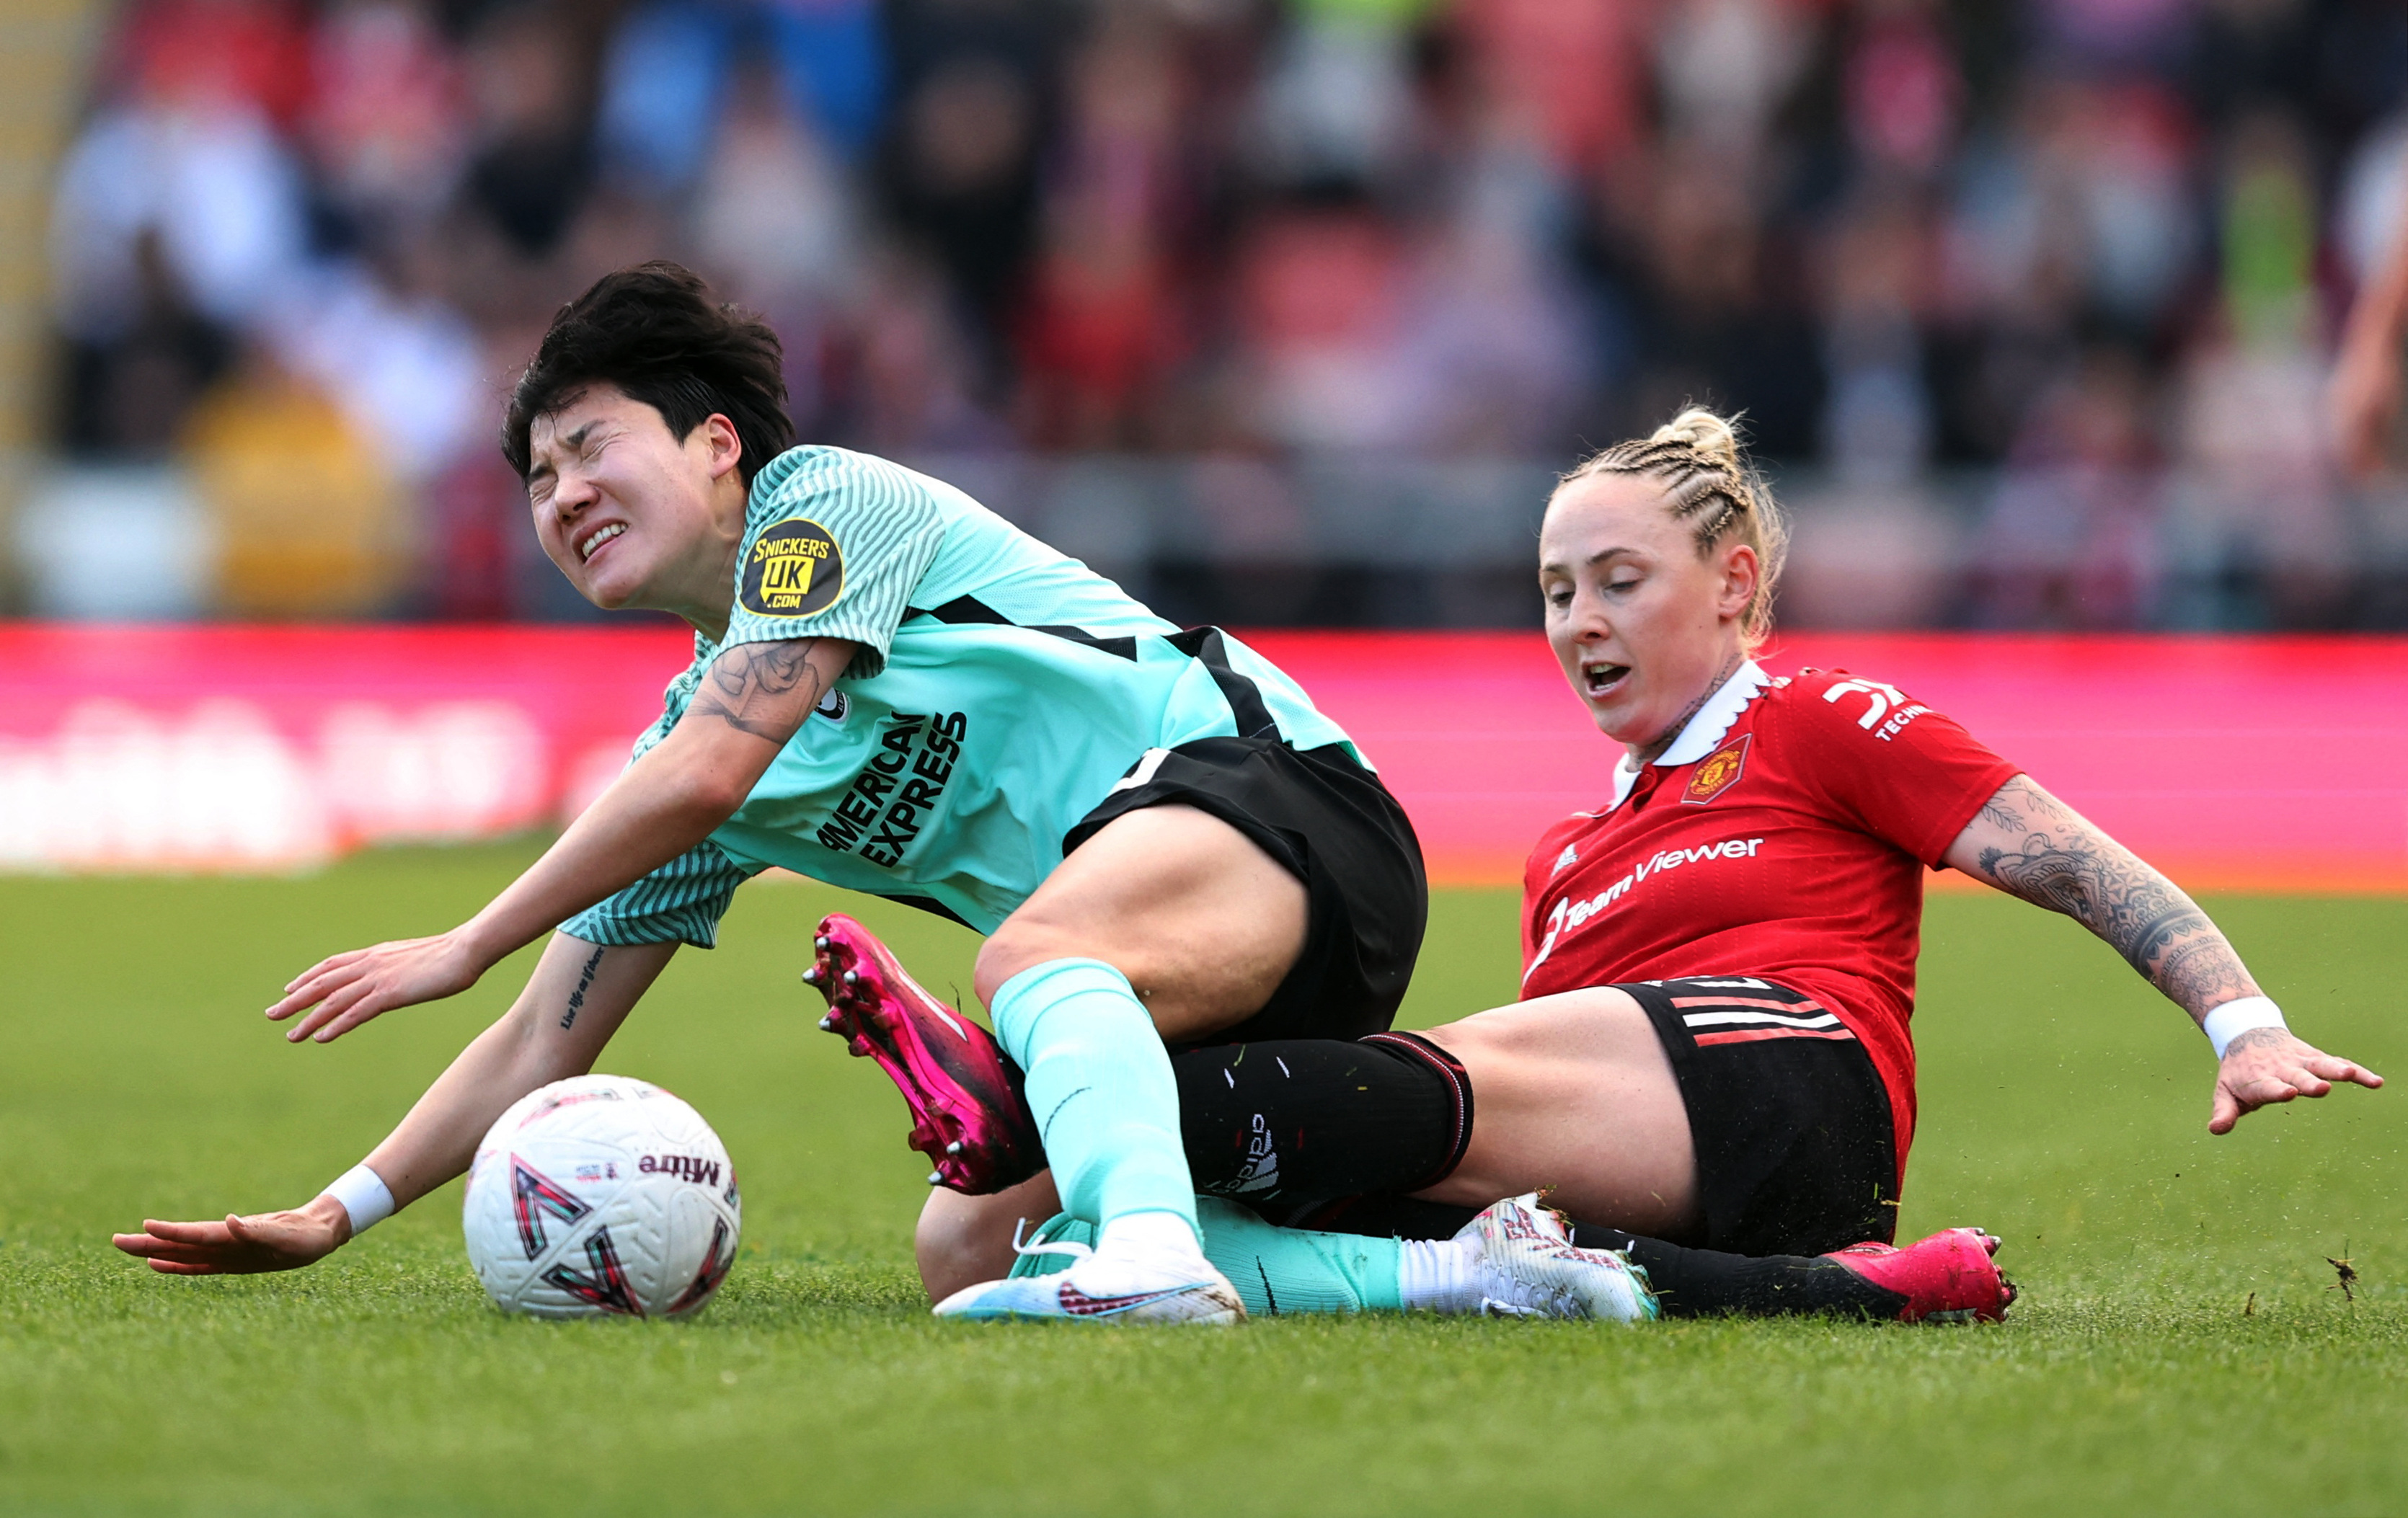 FA Cup semi-final win could prove symbolic for Manchester United women as  they seek Wembley debut